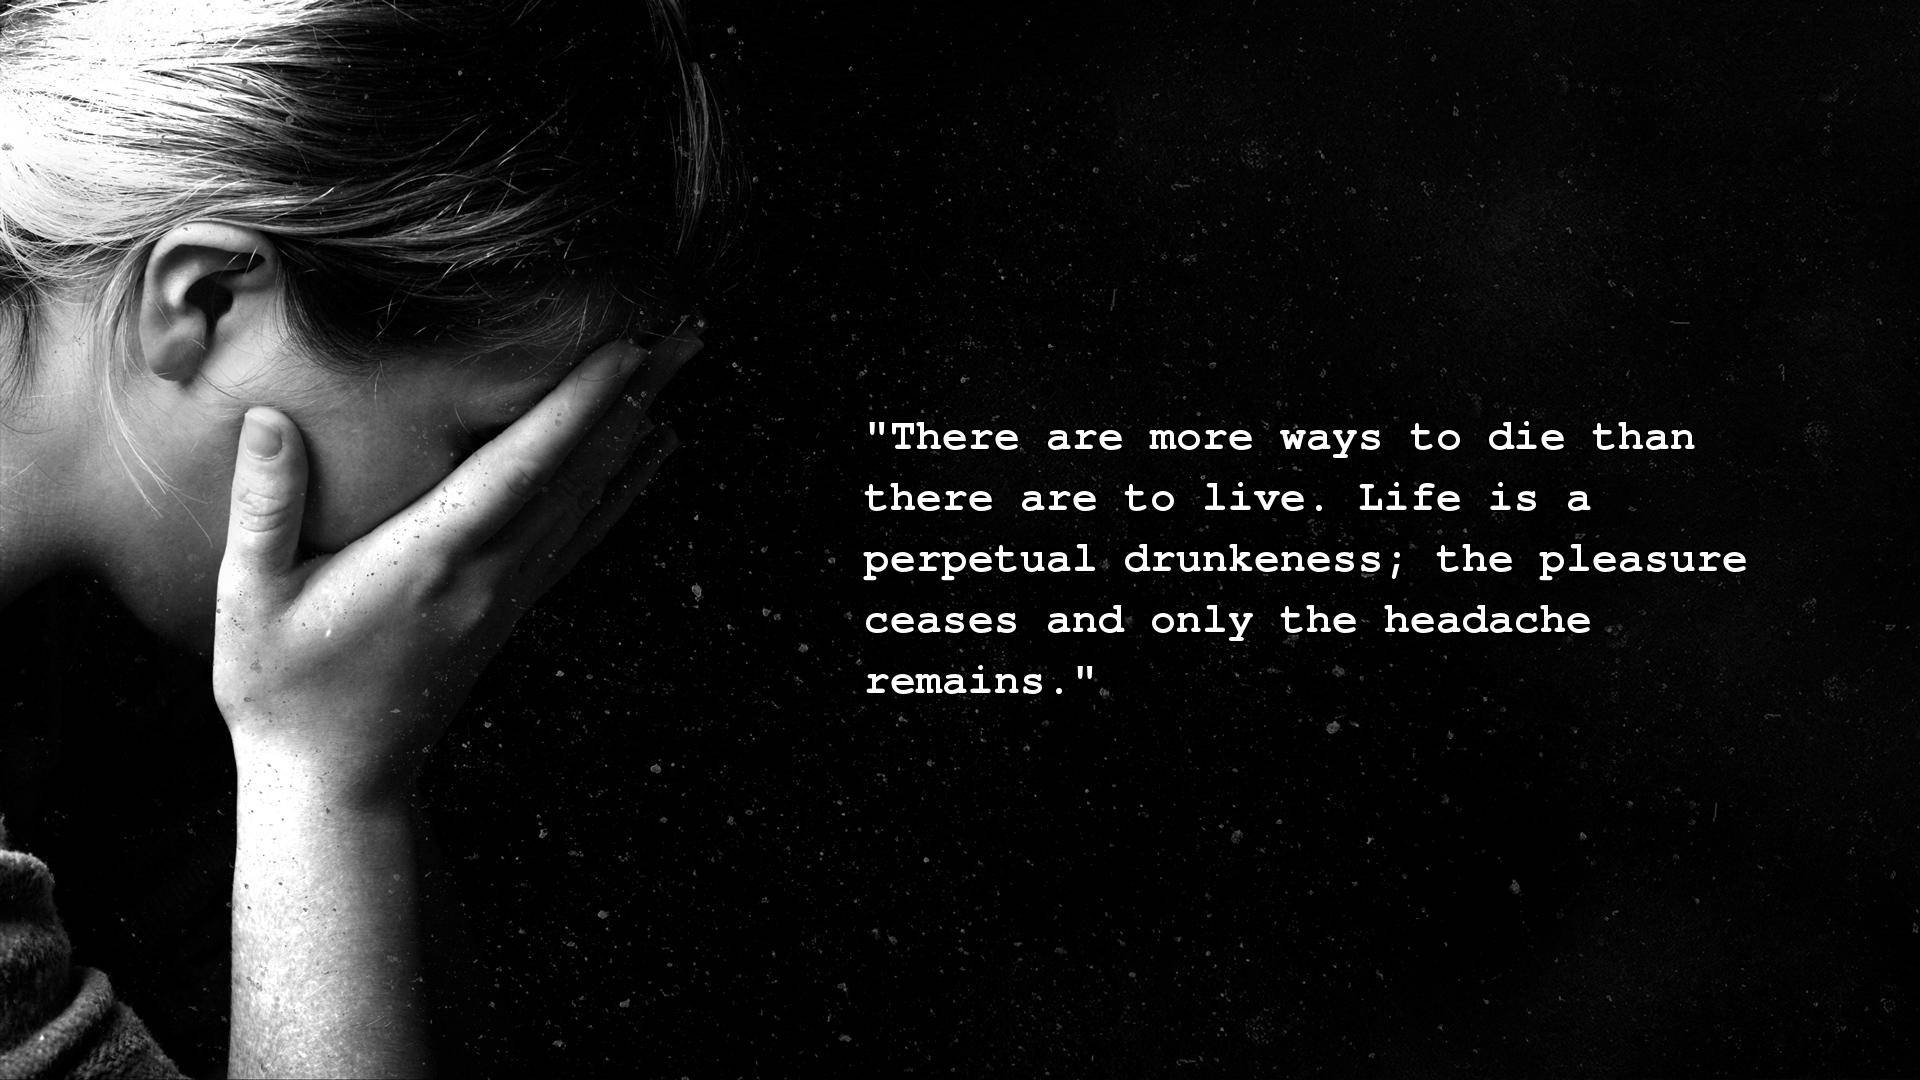 Crying Woman With Depressing Quote Wallpaper